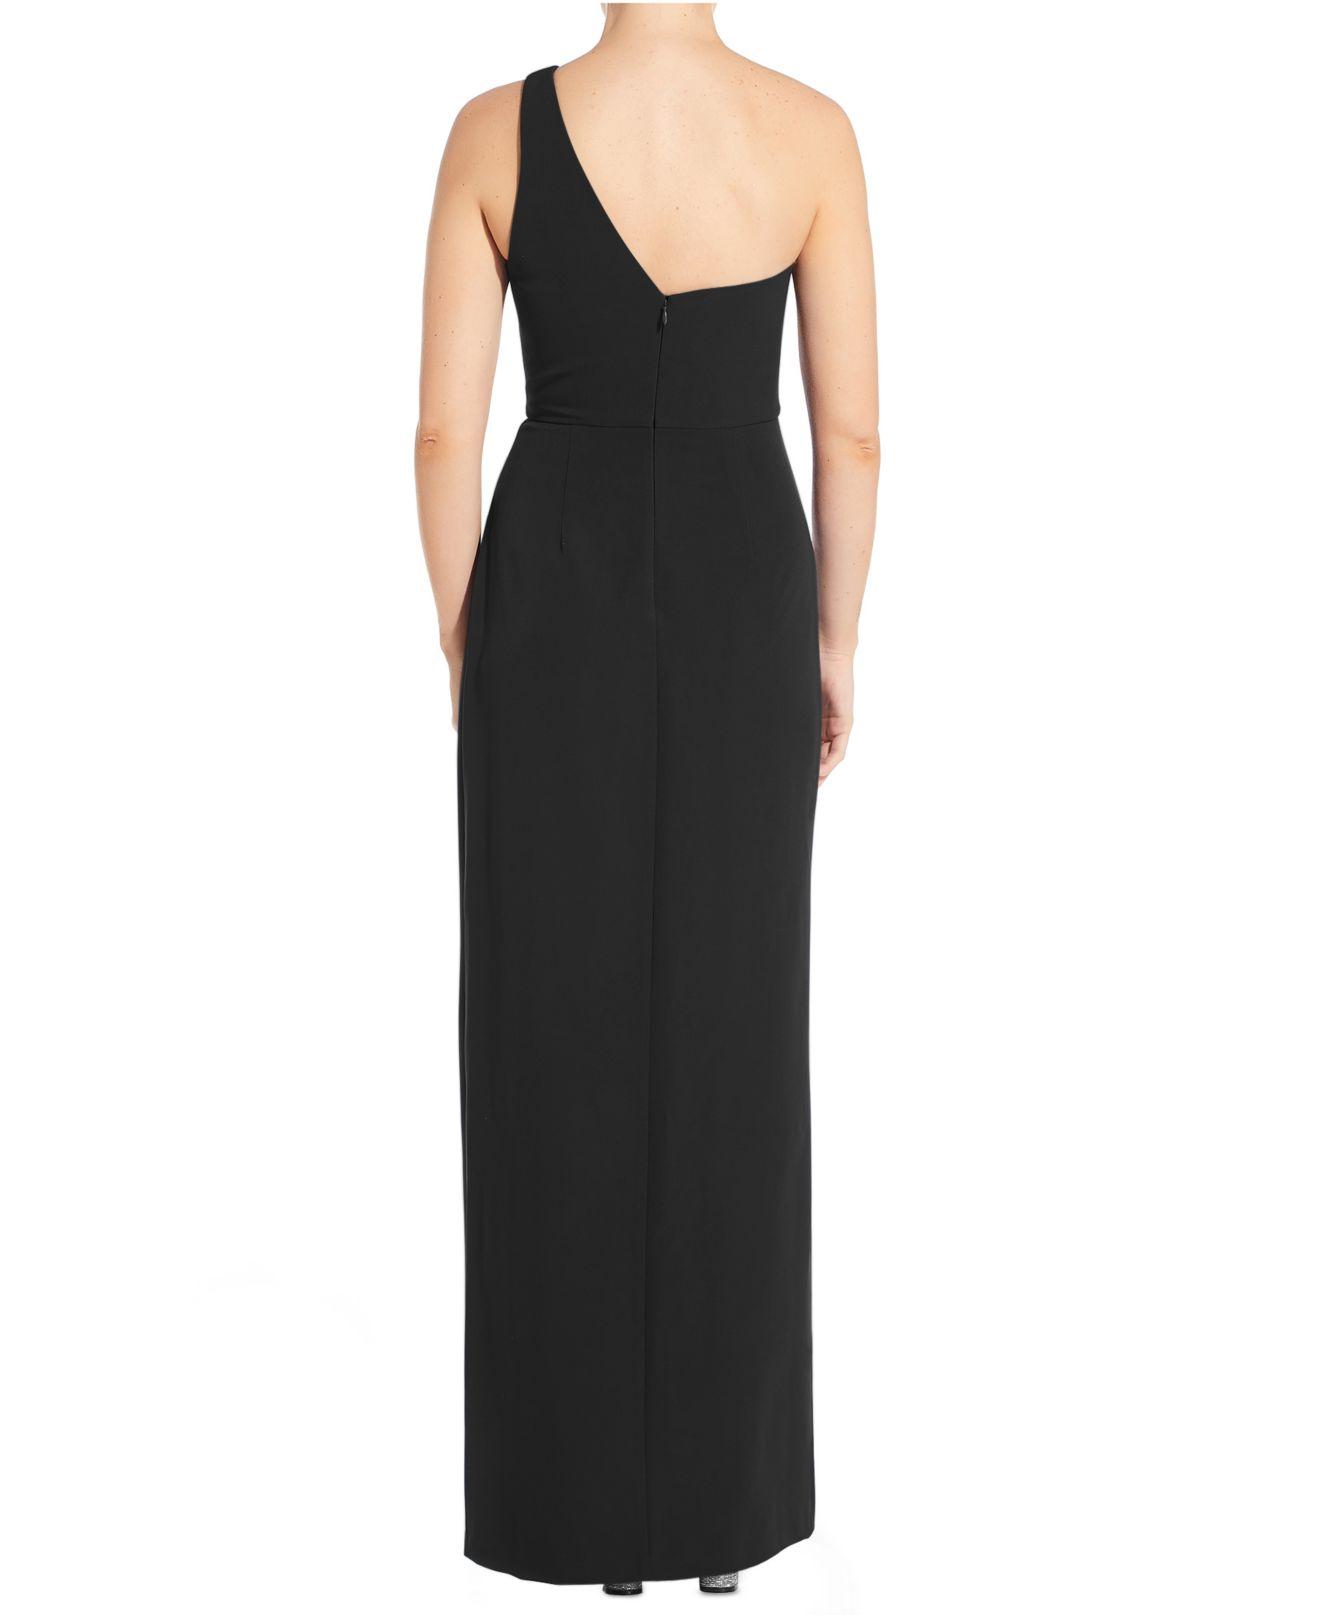 Aidan By Aidan Mattox Synthetic Crepe One-shoulder Jumpsuit in Black - Lyst